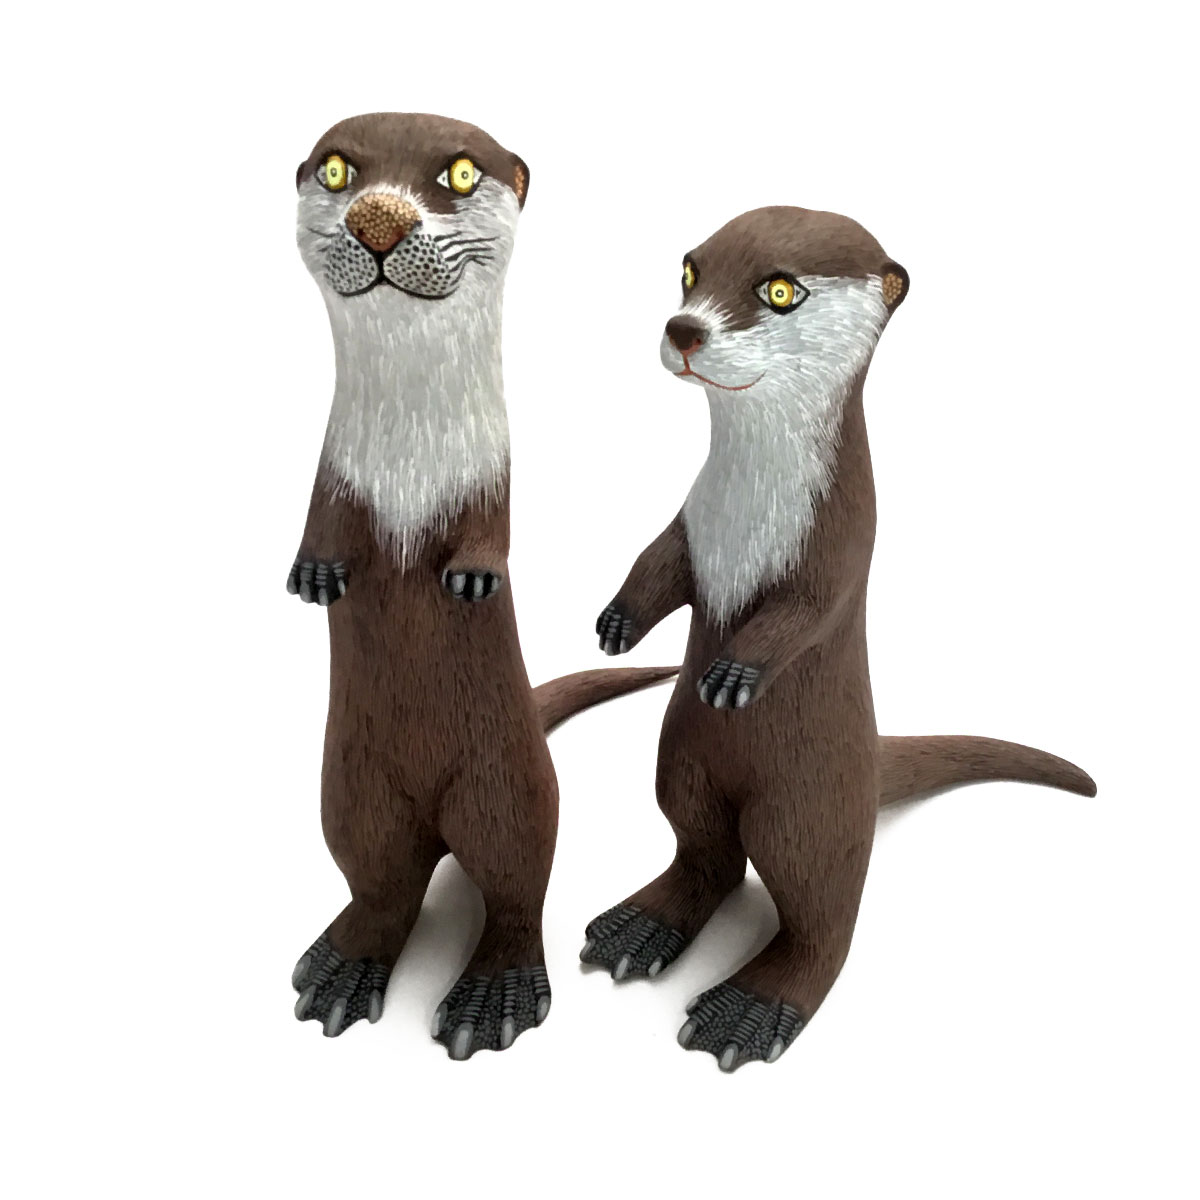 Eleazar Morales Eleazar Morales: Asian Small Clawed Otter Friends Otters